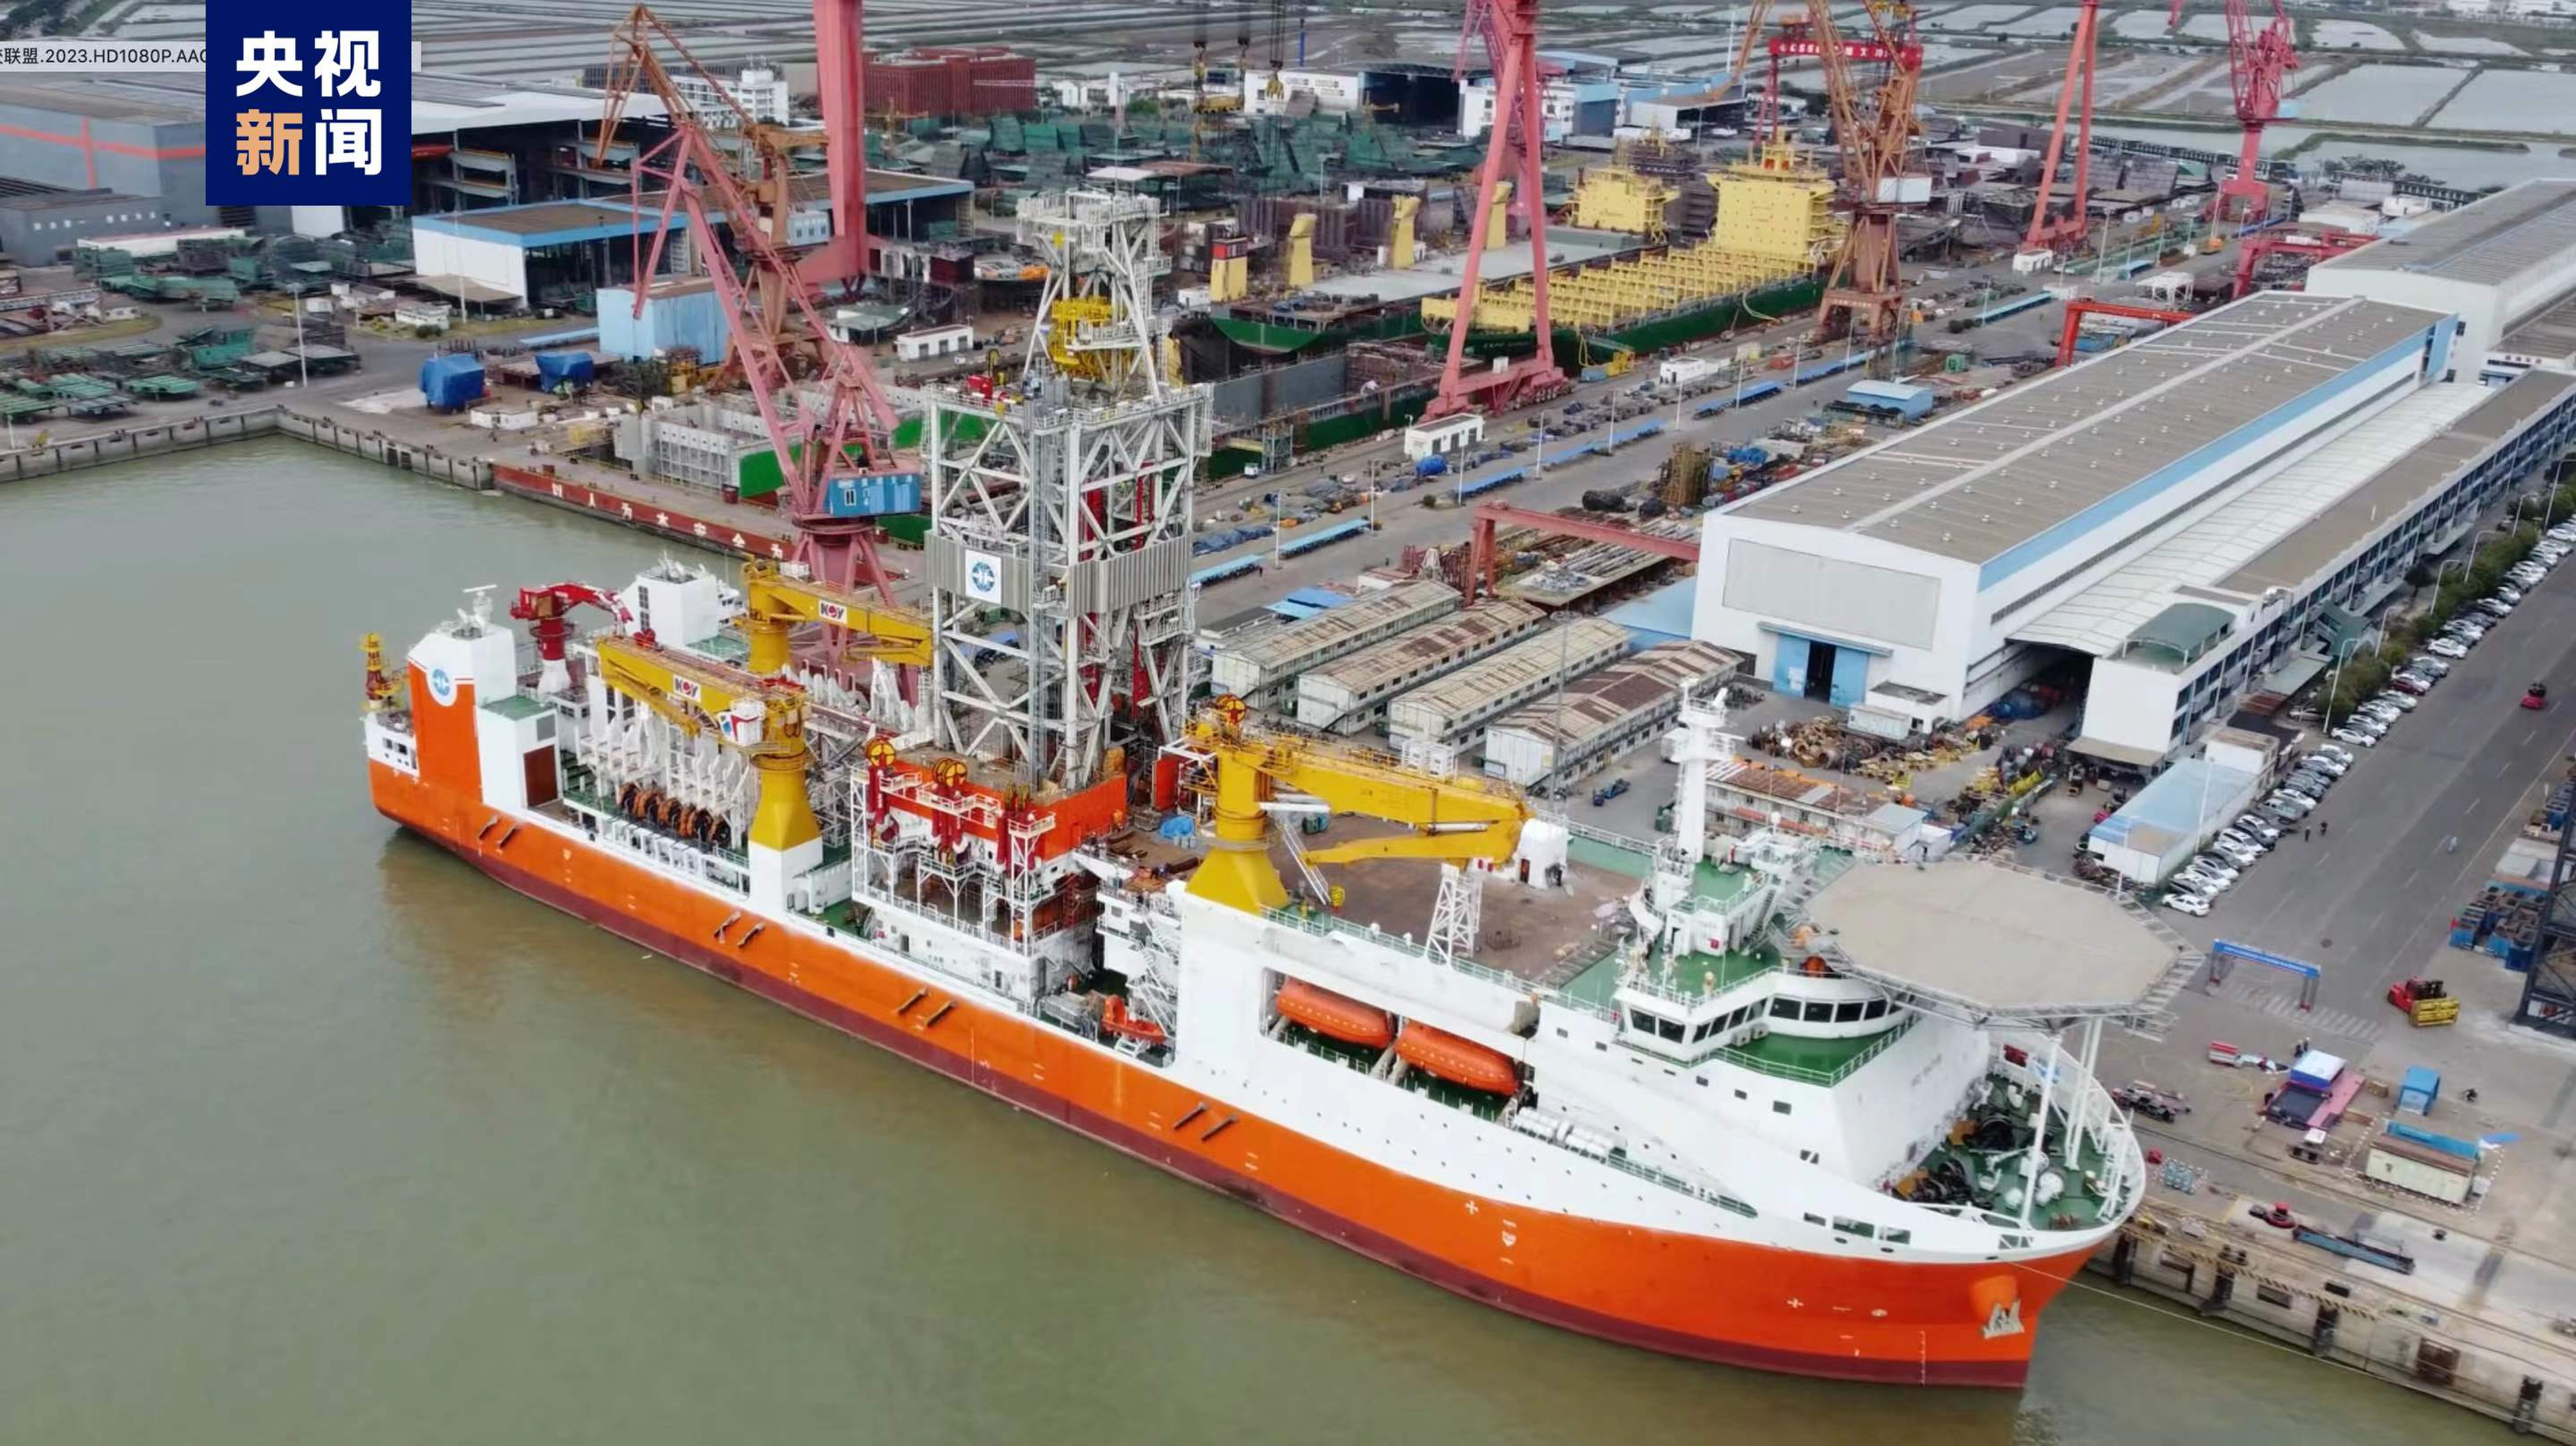 China’s Dream drillship (pictured) will launch on Friday and be capable of mining resources from some of the deepest parts of the ocean. Photo: SCMPOST